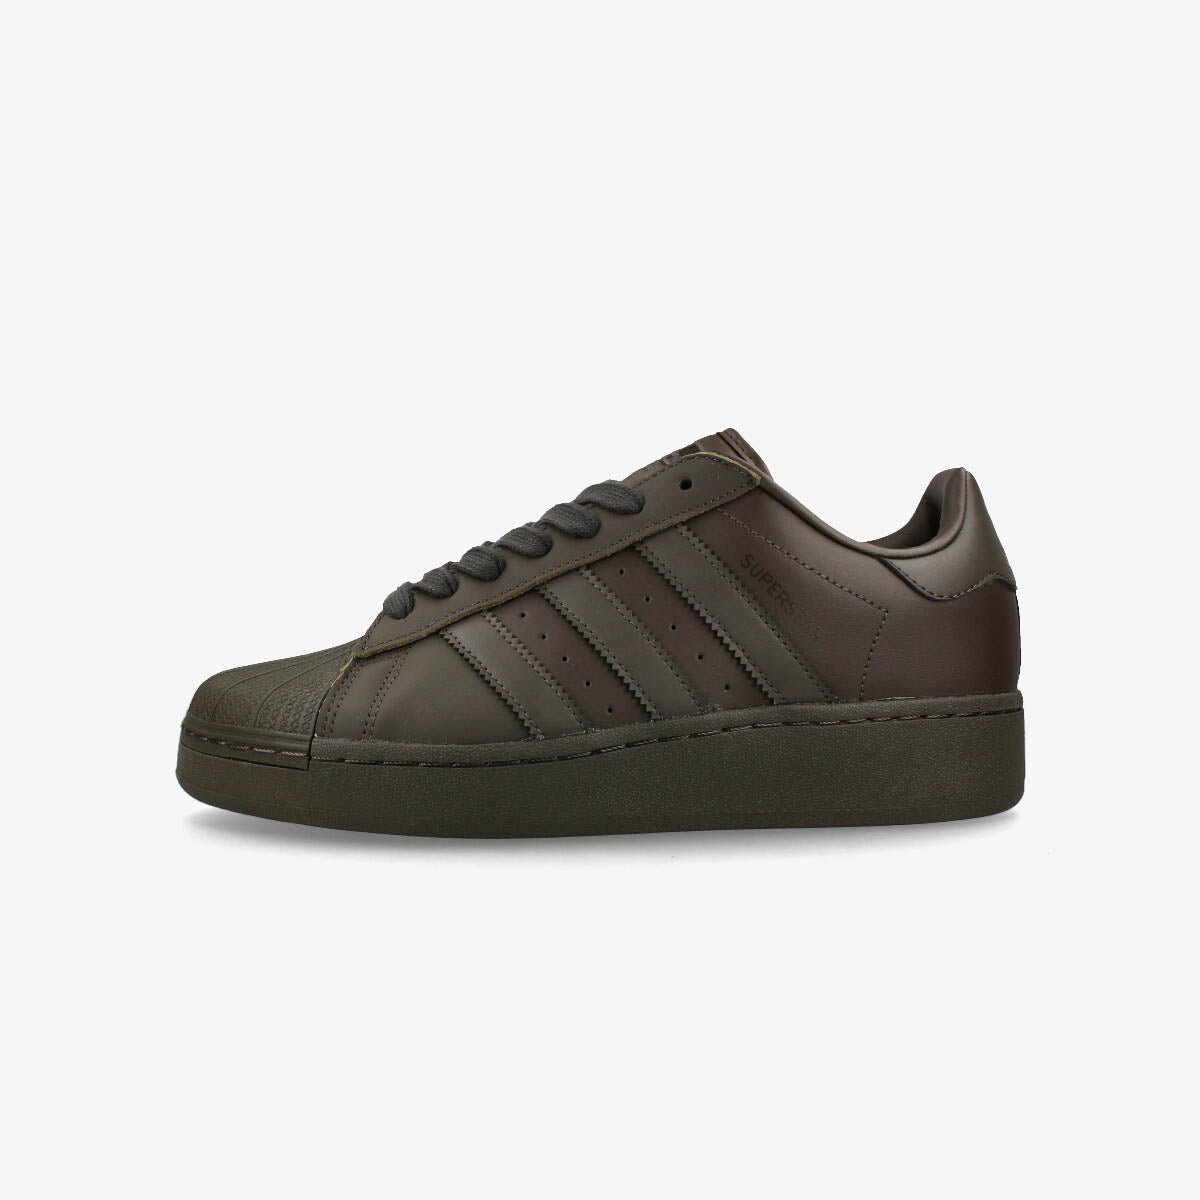 adidas SUPERSTAR XLG SHADOW OLIVE/SHADOW OLIVE/CORE BLACK ig0735